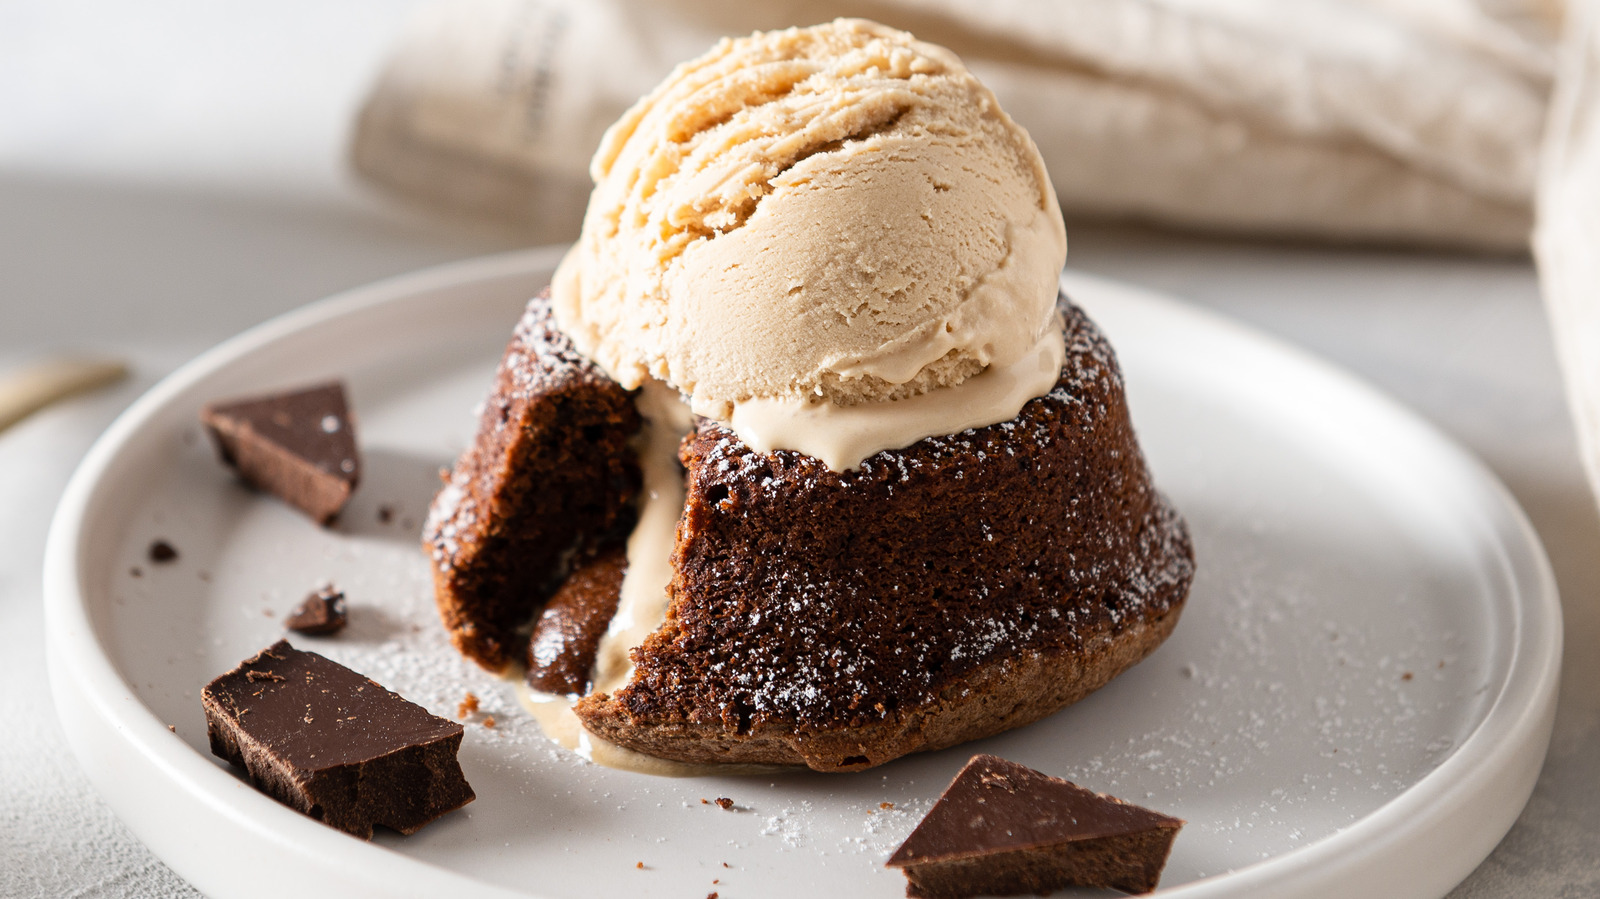 Make restaurant like Choco Lava Cake at home | Times of India